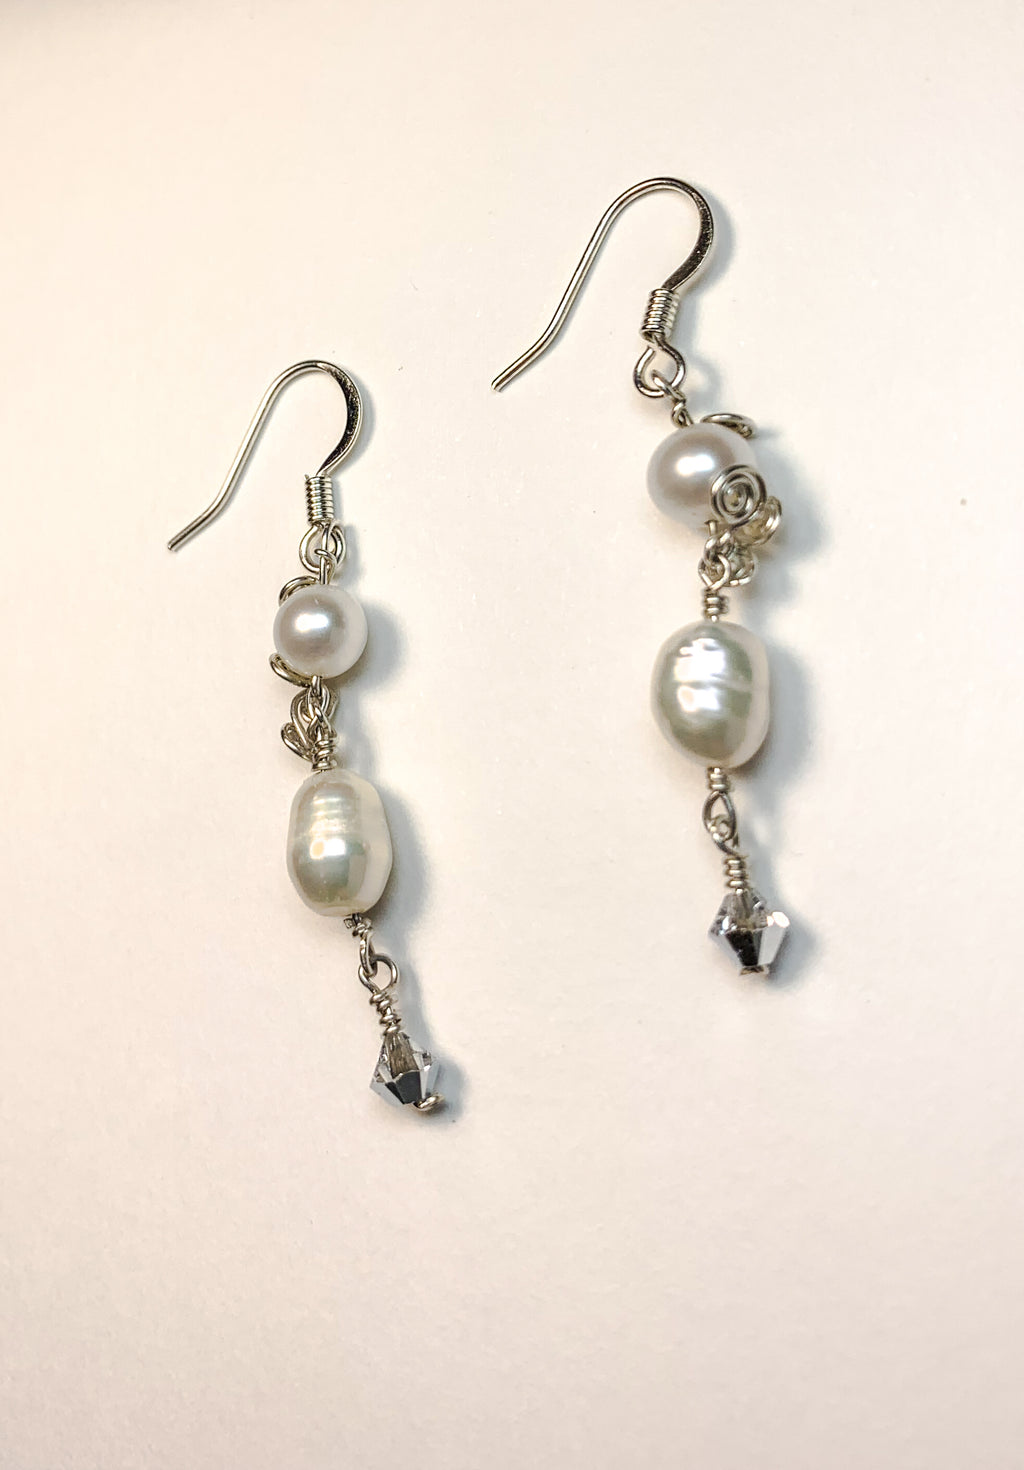 Cultured Freshwater Pearl Earrings with Silver wire wrapping